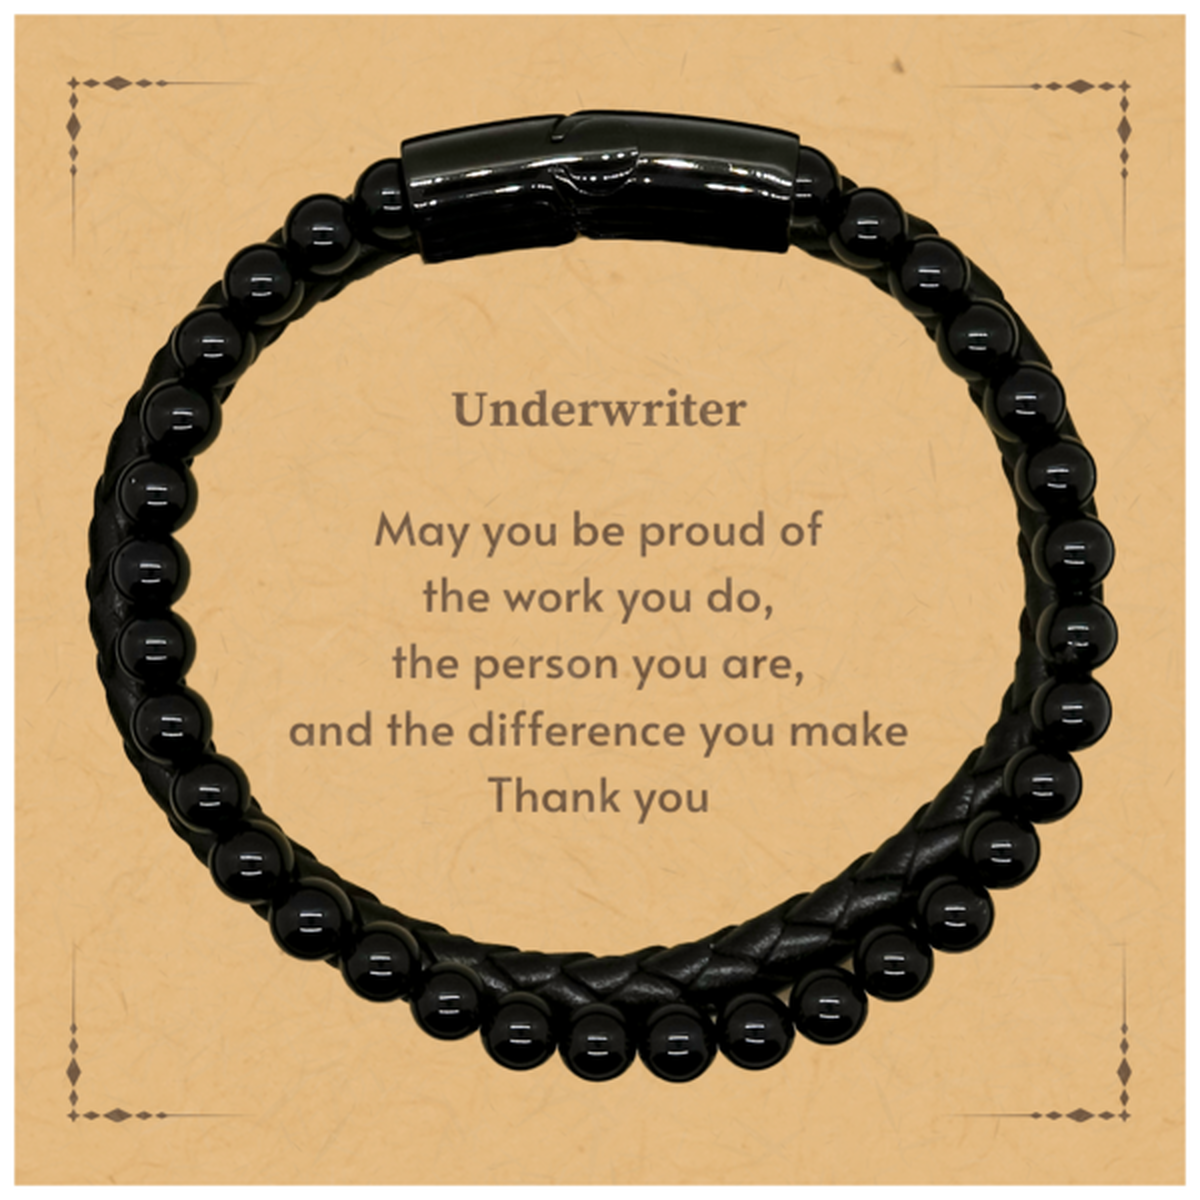 Heartwarming Stone Leather Bracelets Retirement Coworkers Gifts for Underwriter, Underwriter May You be proud of the work you do, the person you are Gifts for Boss Men Women Friends